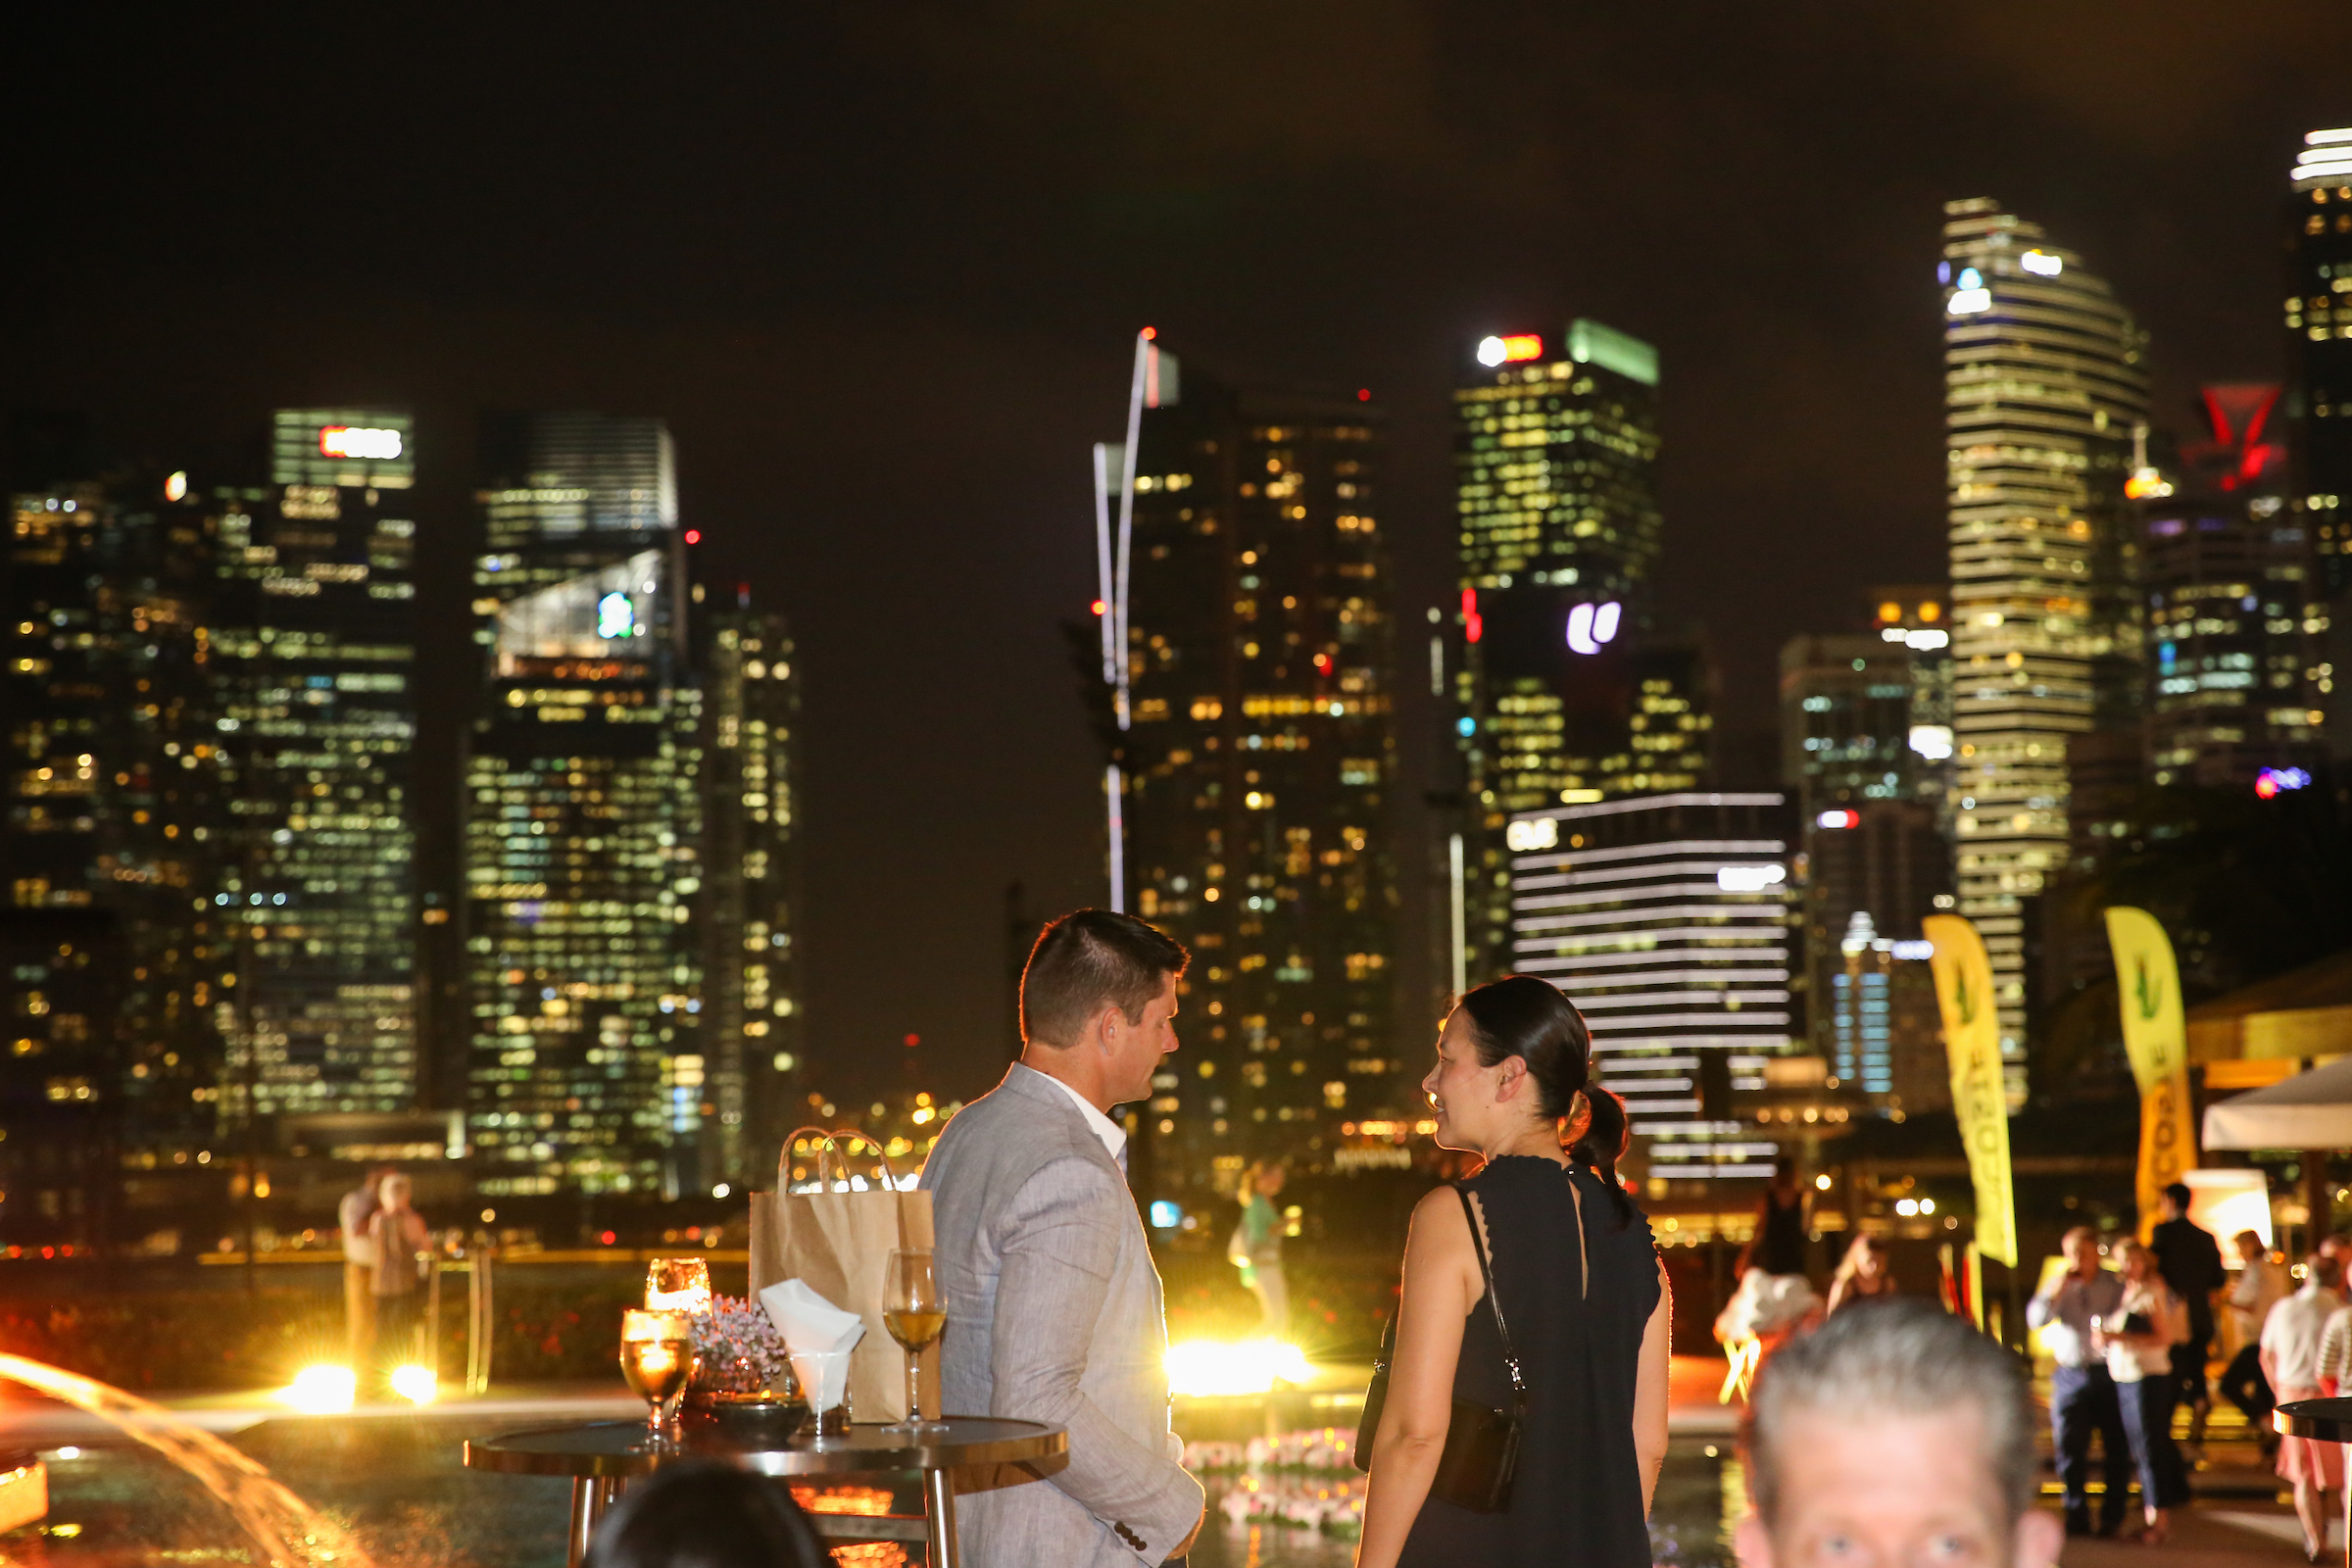 Social events schedule announced for TFWA Asia Pacific Exhibition & Conference